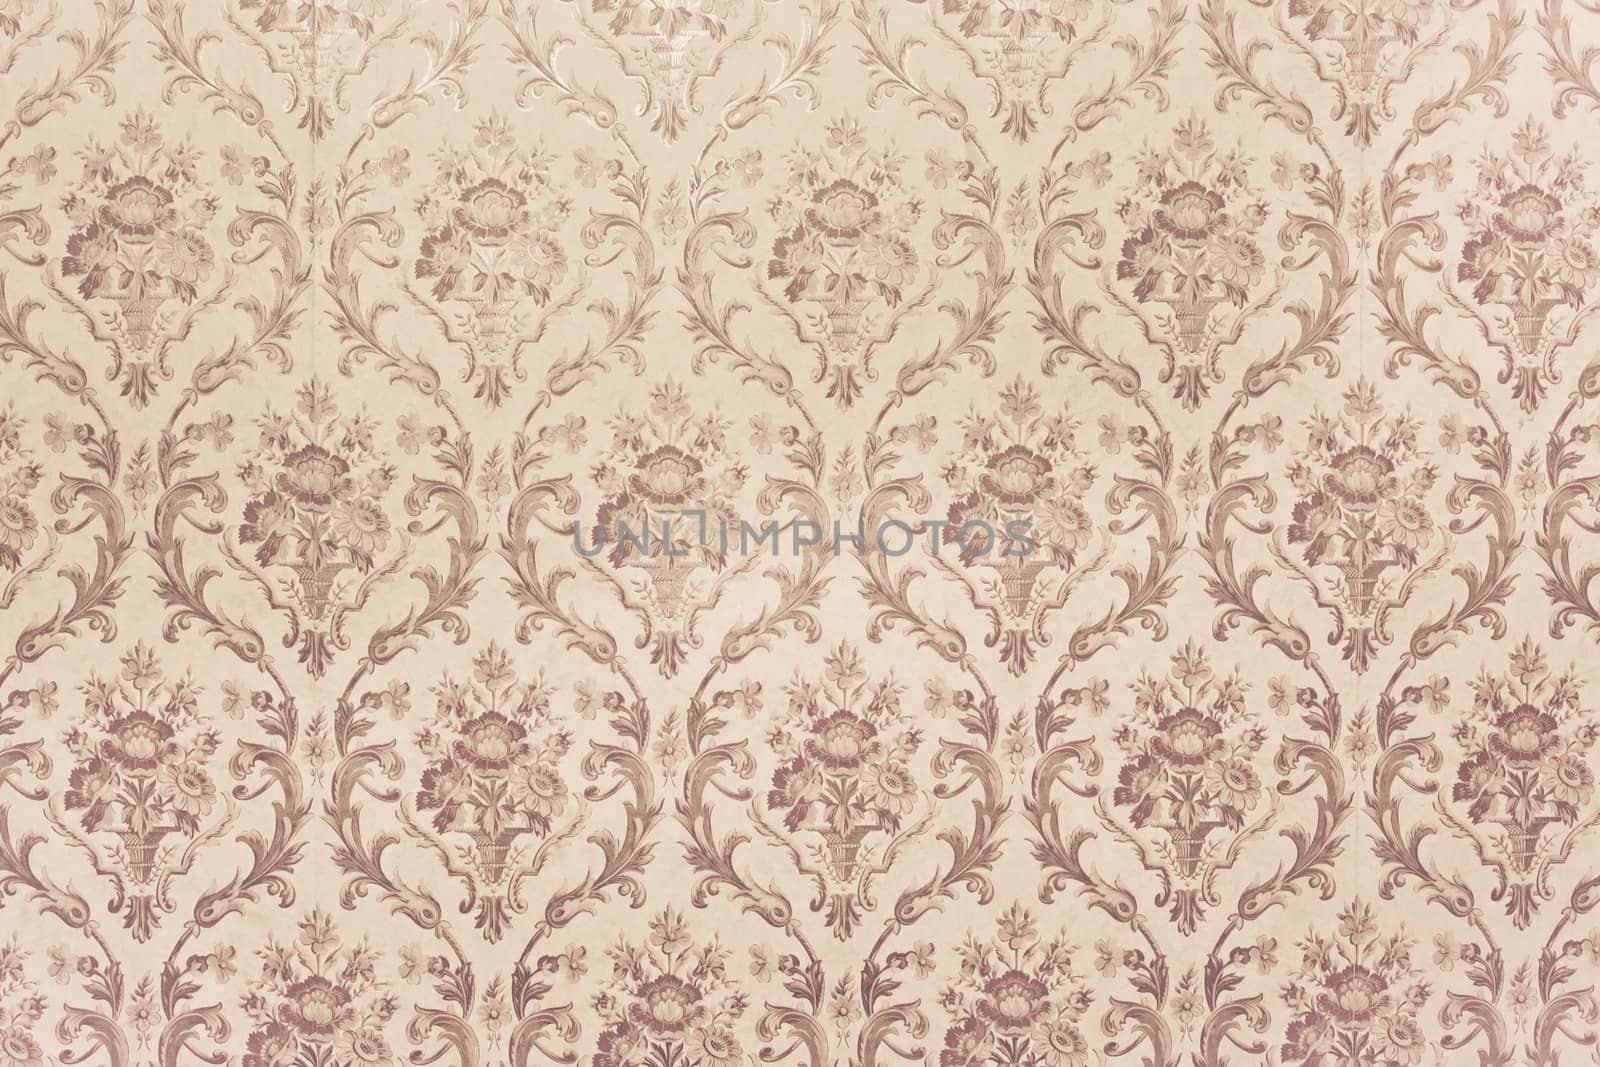 Close up of vintage wallpaper pattern as a background